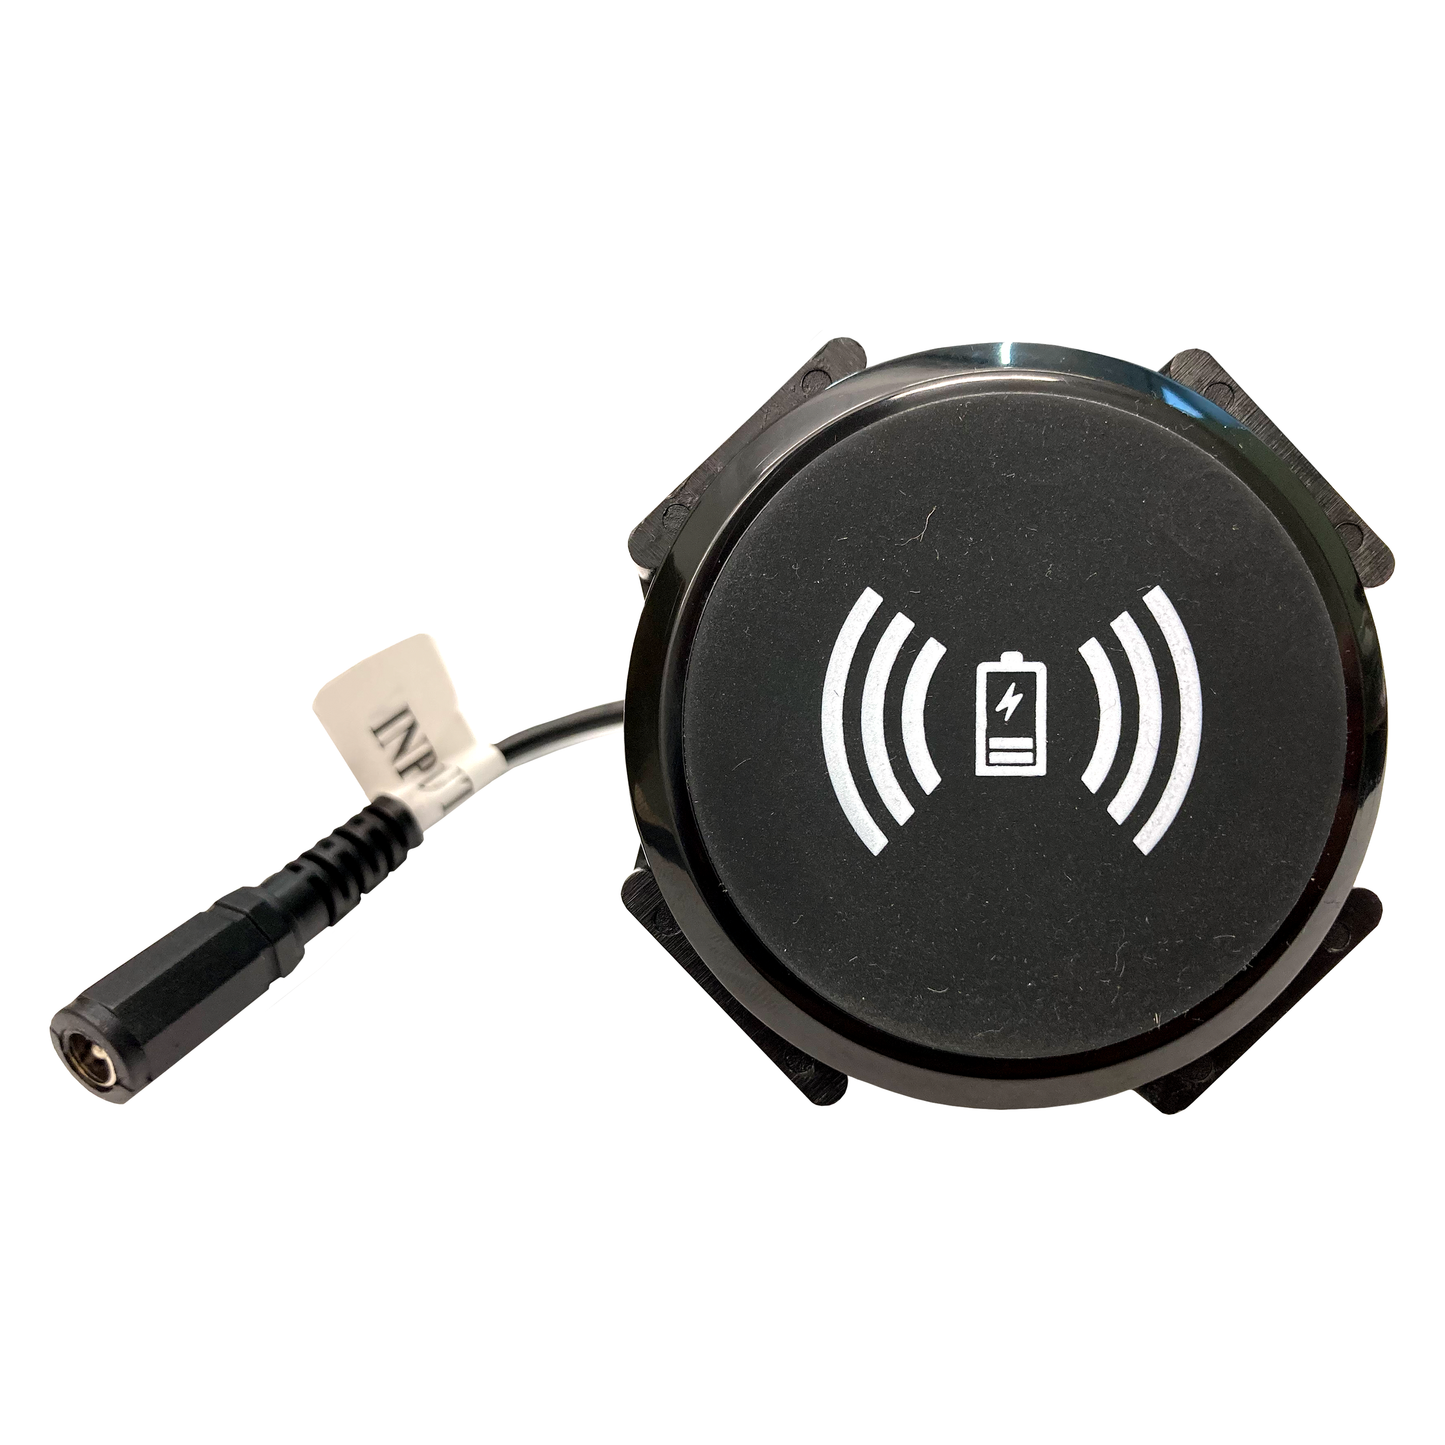 Improve your customer's quality of life while playing Pennsylvania Skill by adding a wireless phone charger that mounts to your machine.  The Wireless Phone Charger is compatible with the Patriot, Cadet, and Cavalier cabinets.